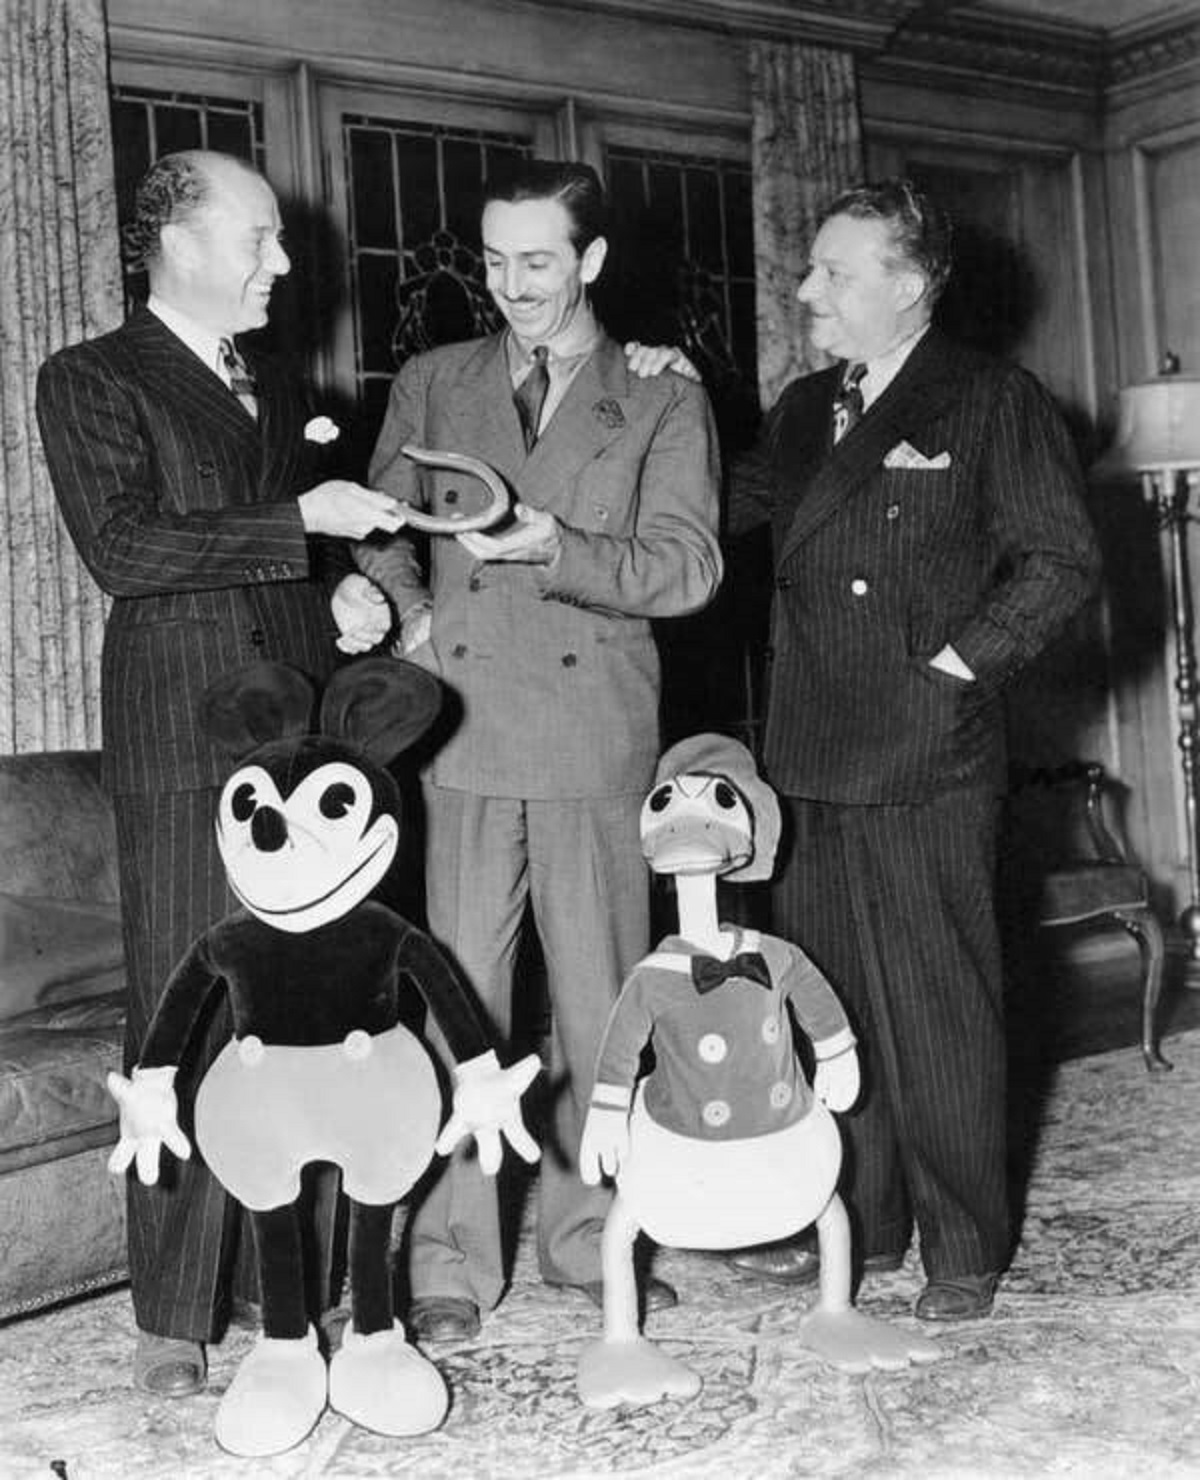 Here's what one of the first physical versions of Mickey Mouse looked like — along with Donald Duck.